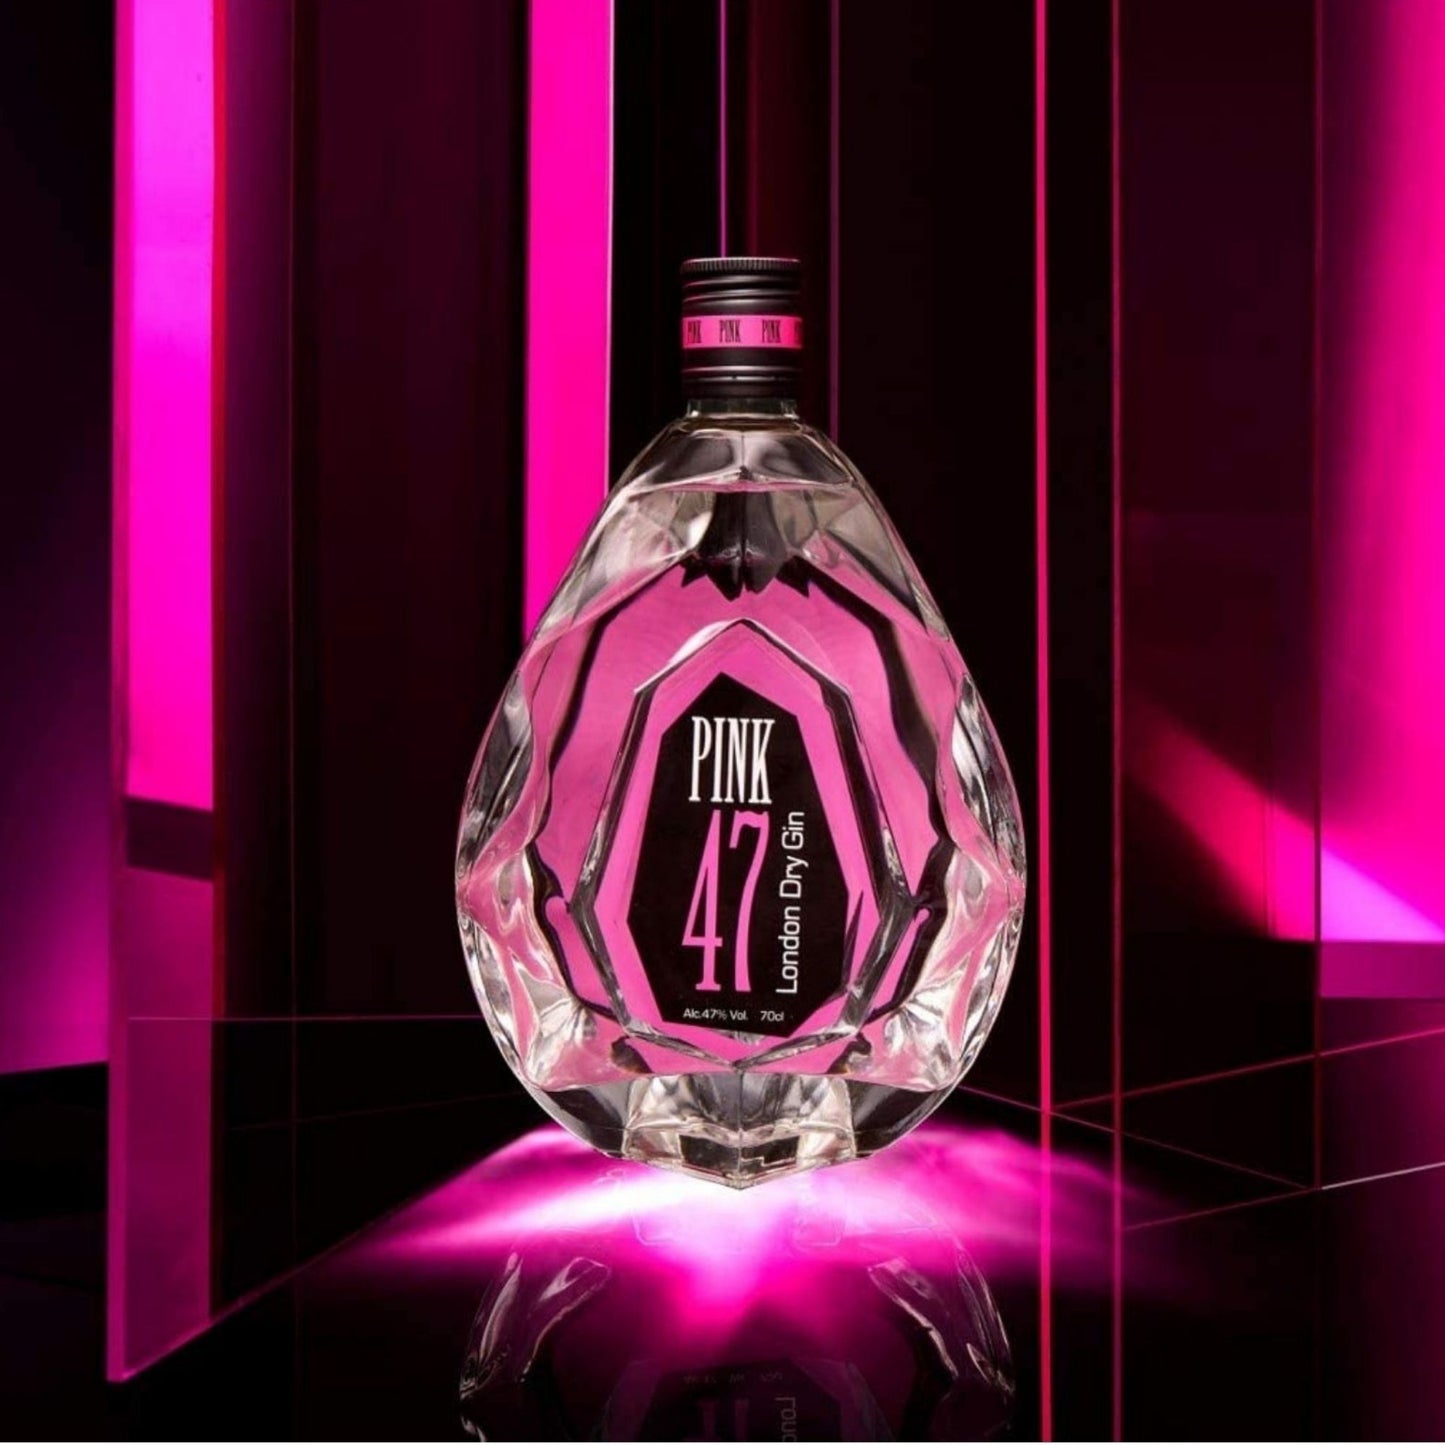 PINK 47 LONDON DRY GIN 07TL